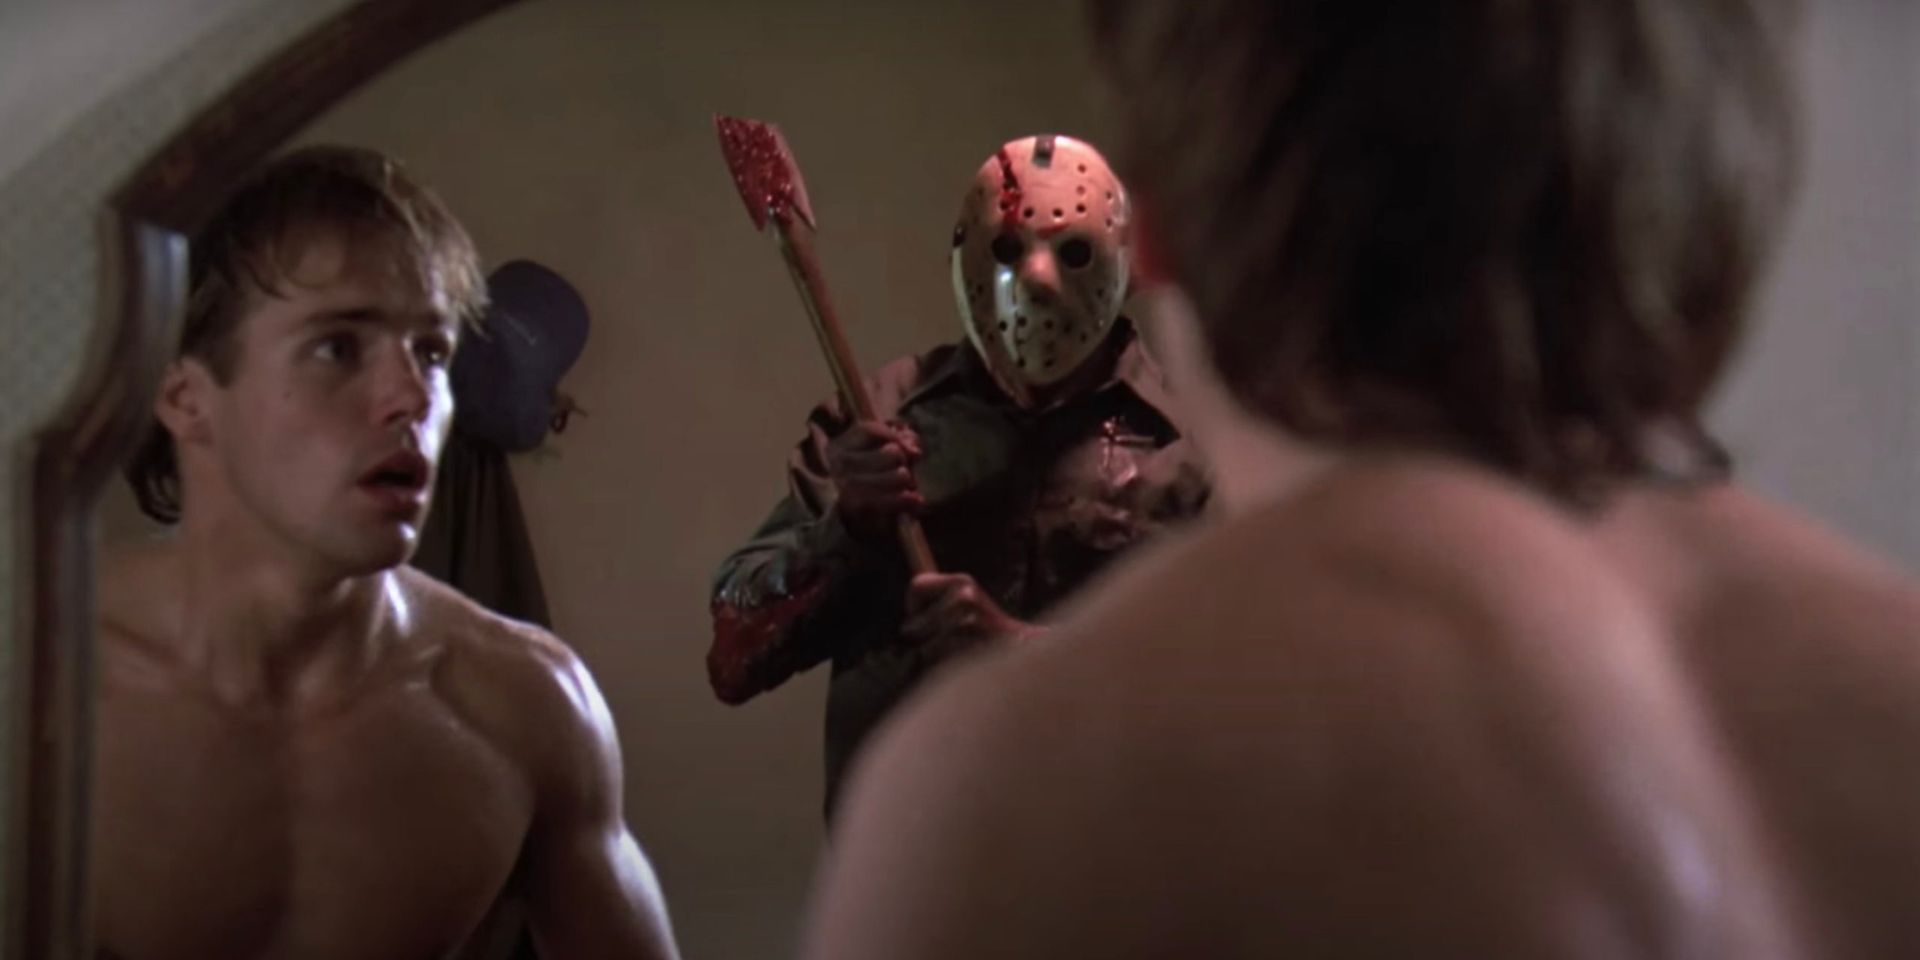 Jason from Friday the 13th reflected in the mirror